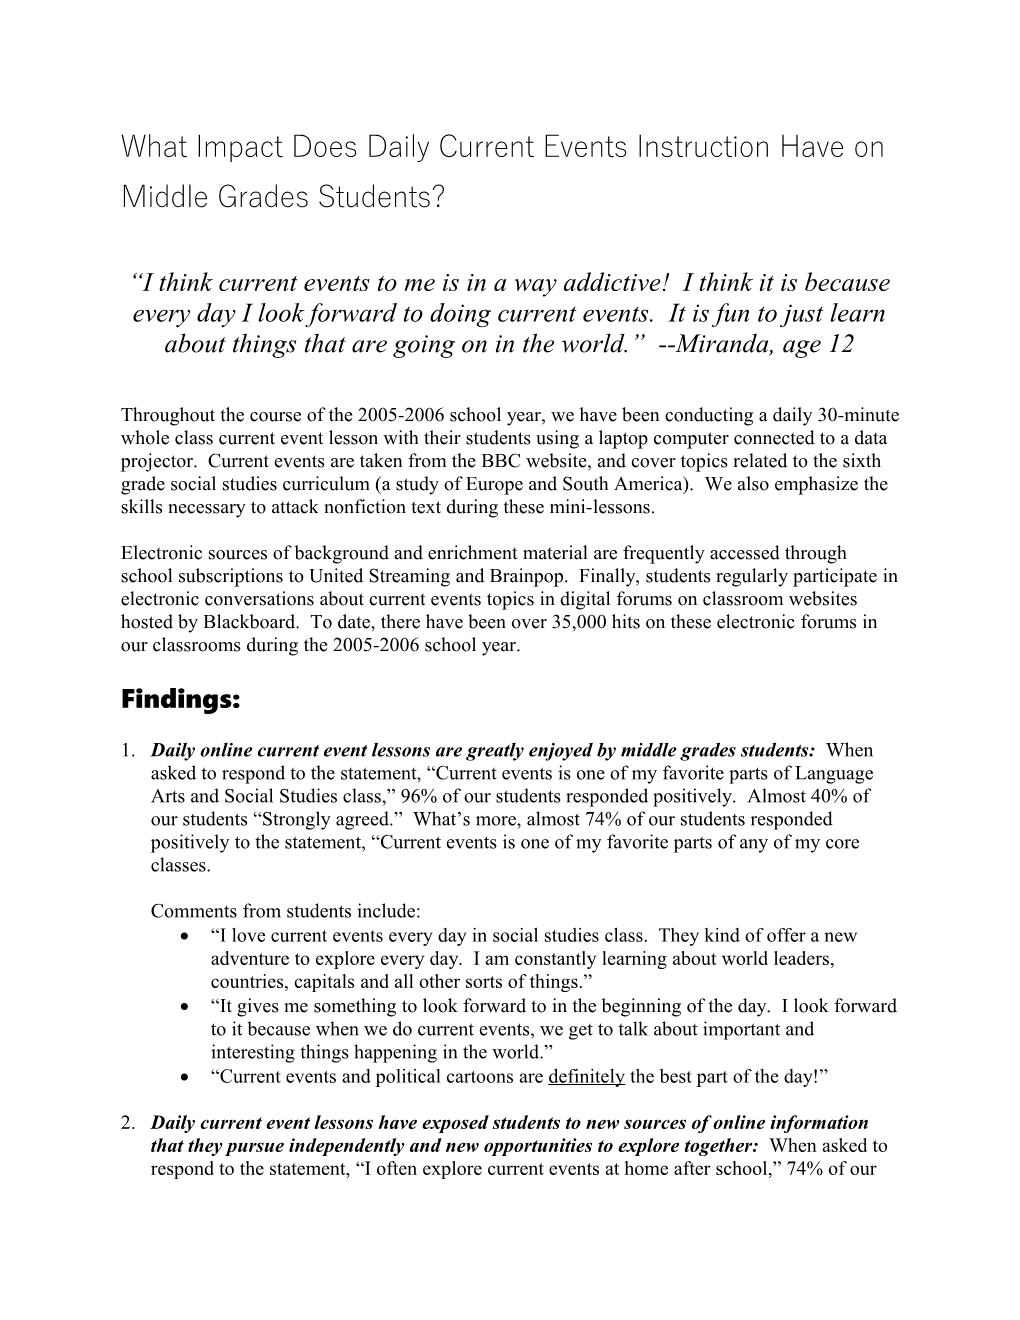 What Impact Does Daily Current Events Instruction Have on Middle Grades Students